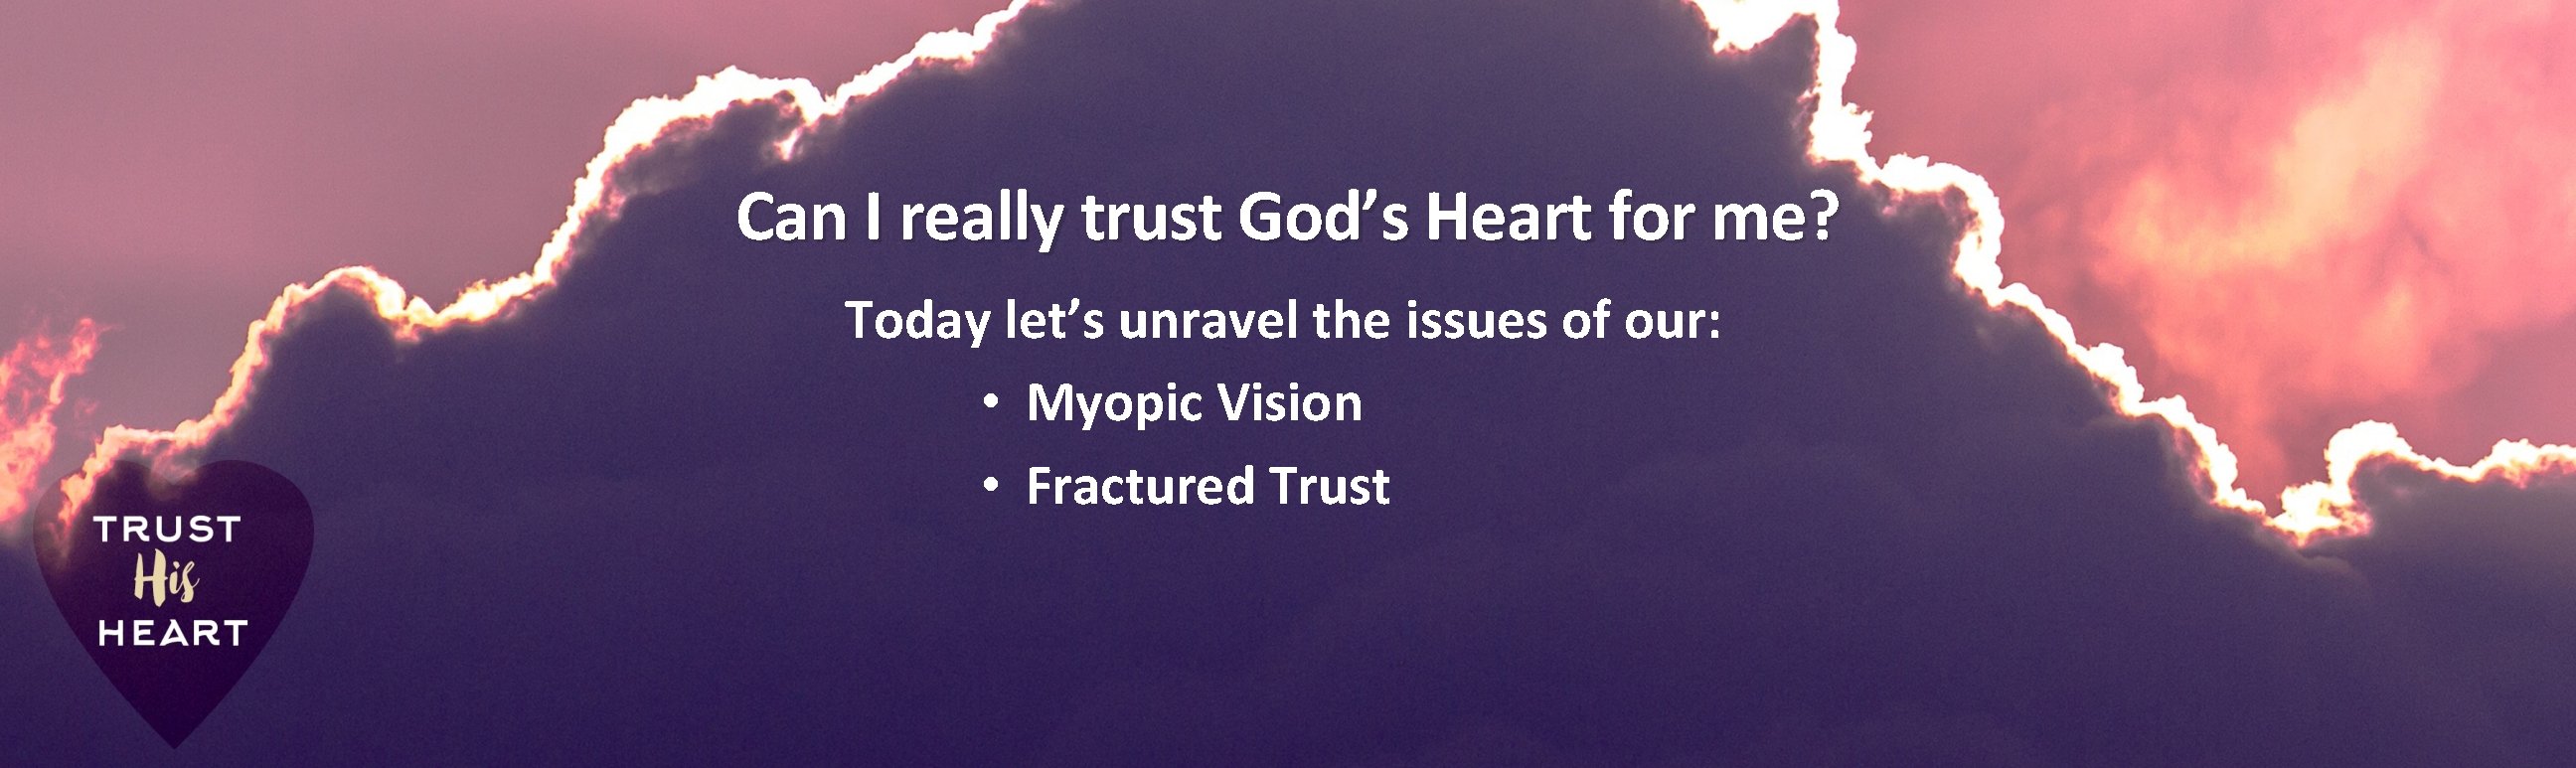 Can I really trust God’s Heart for me? Today let’s unravel the issues of